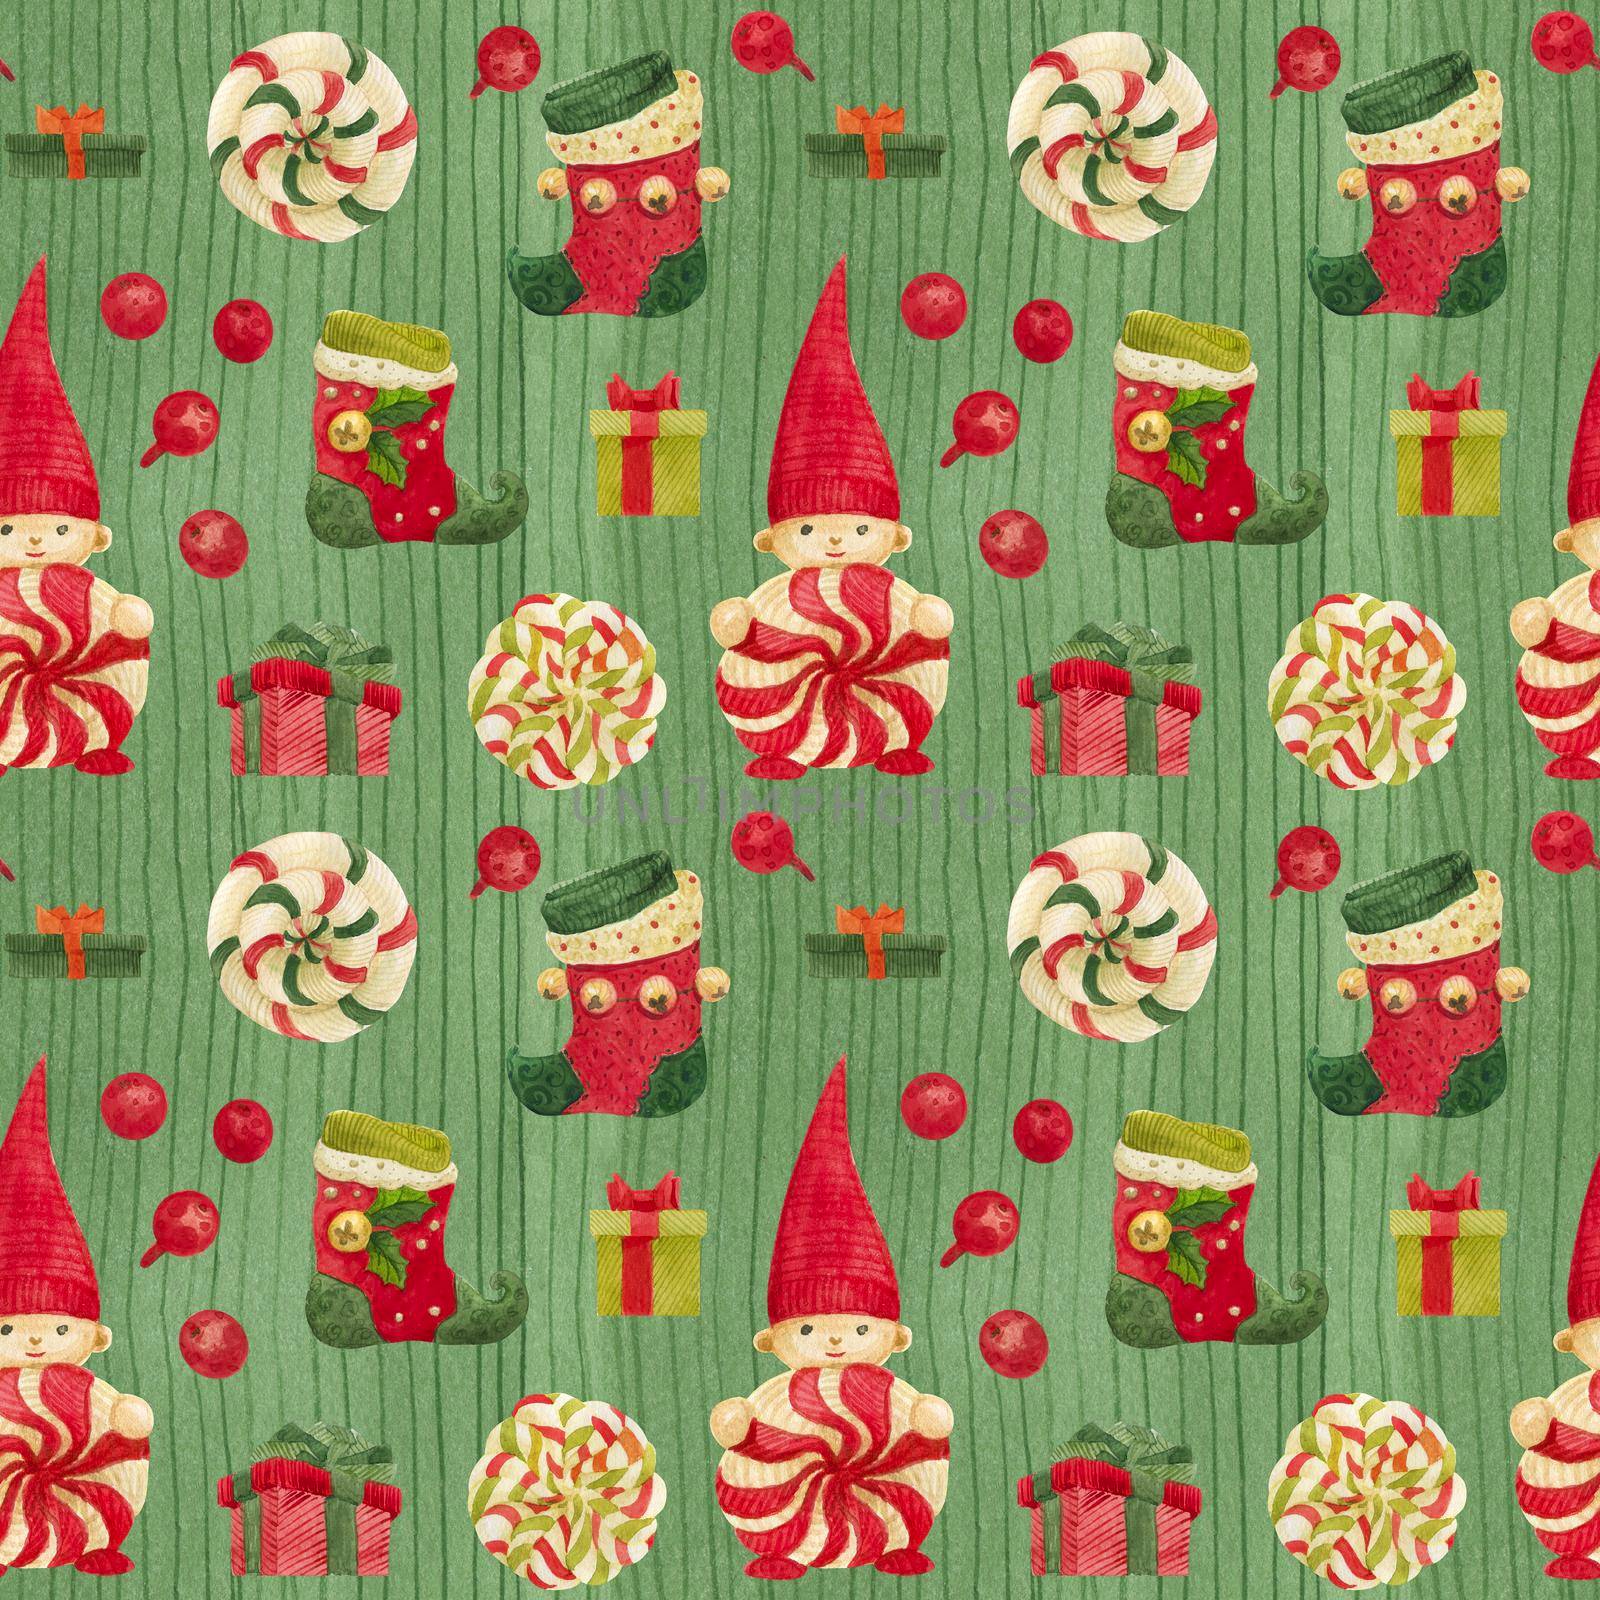 Christmas Elves Factory seamless watercolor pattern with stockings and lollipops